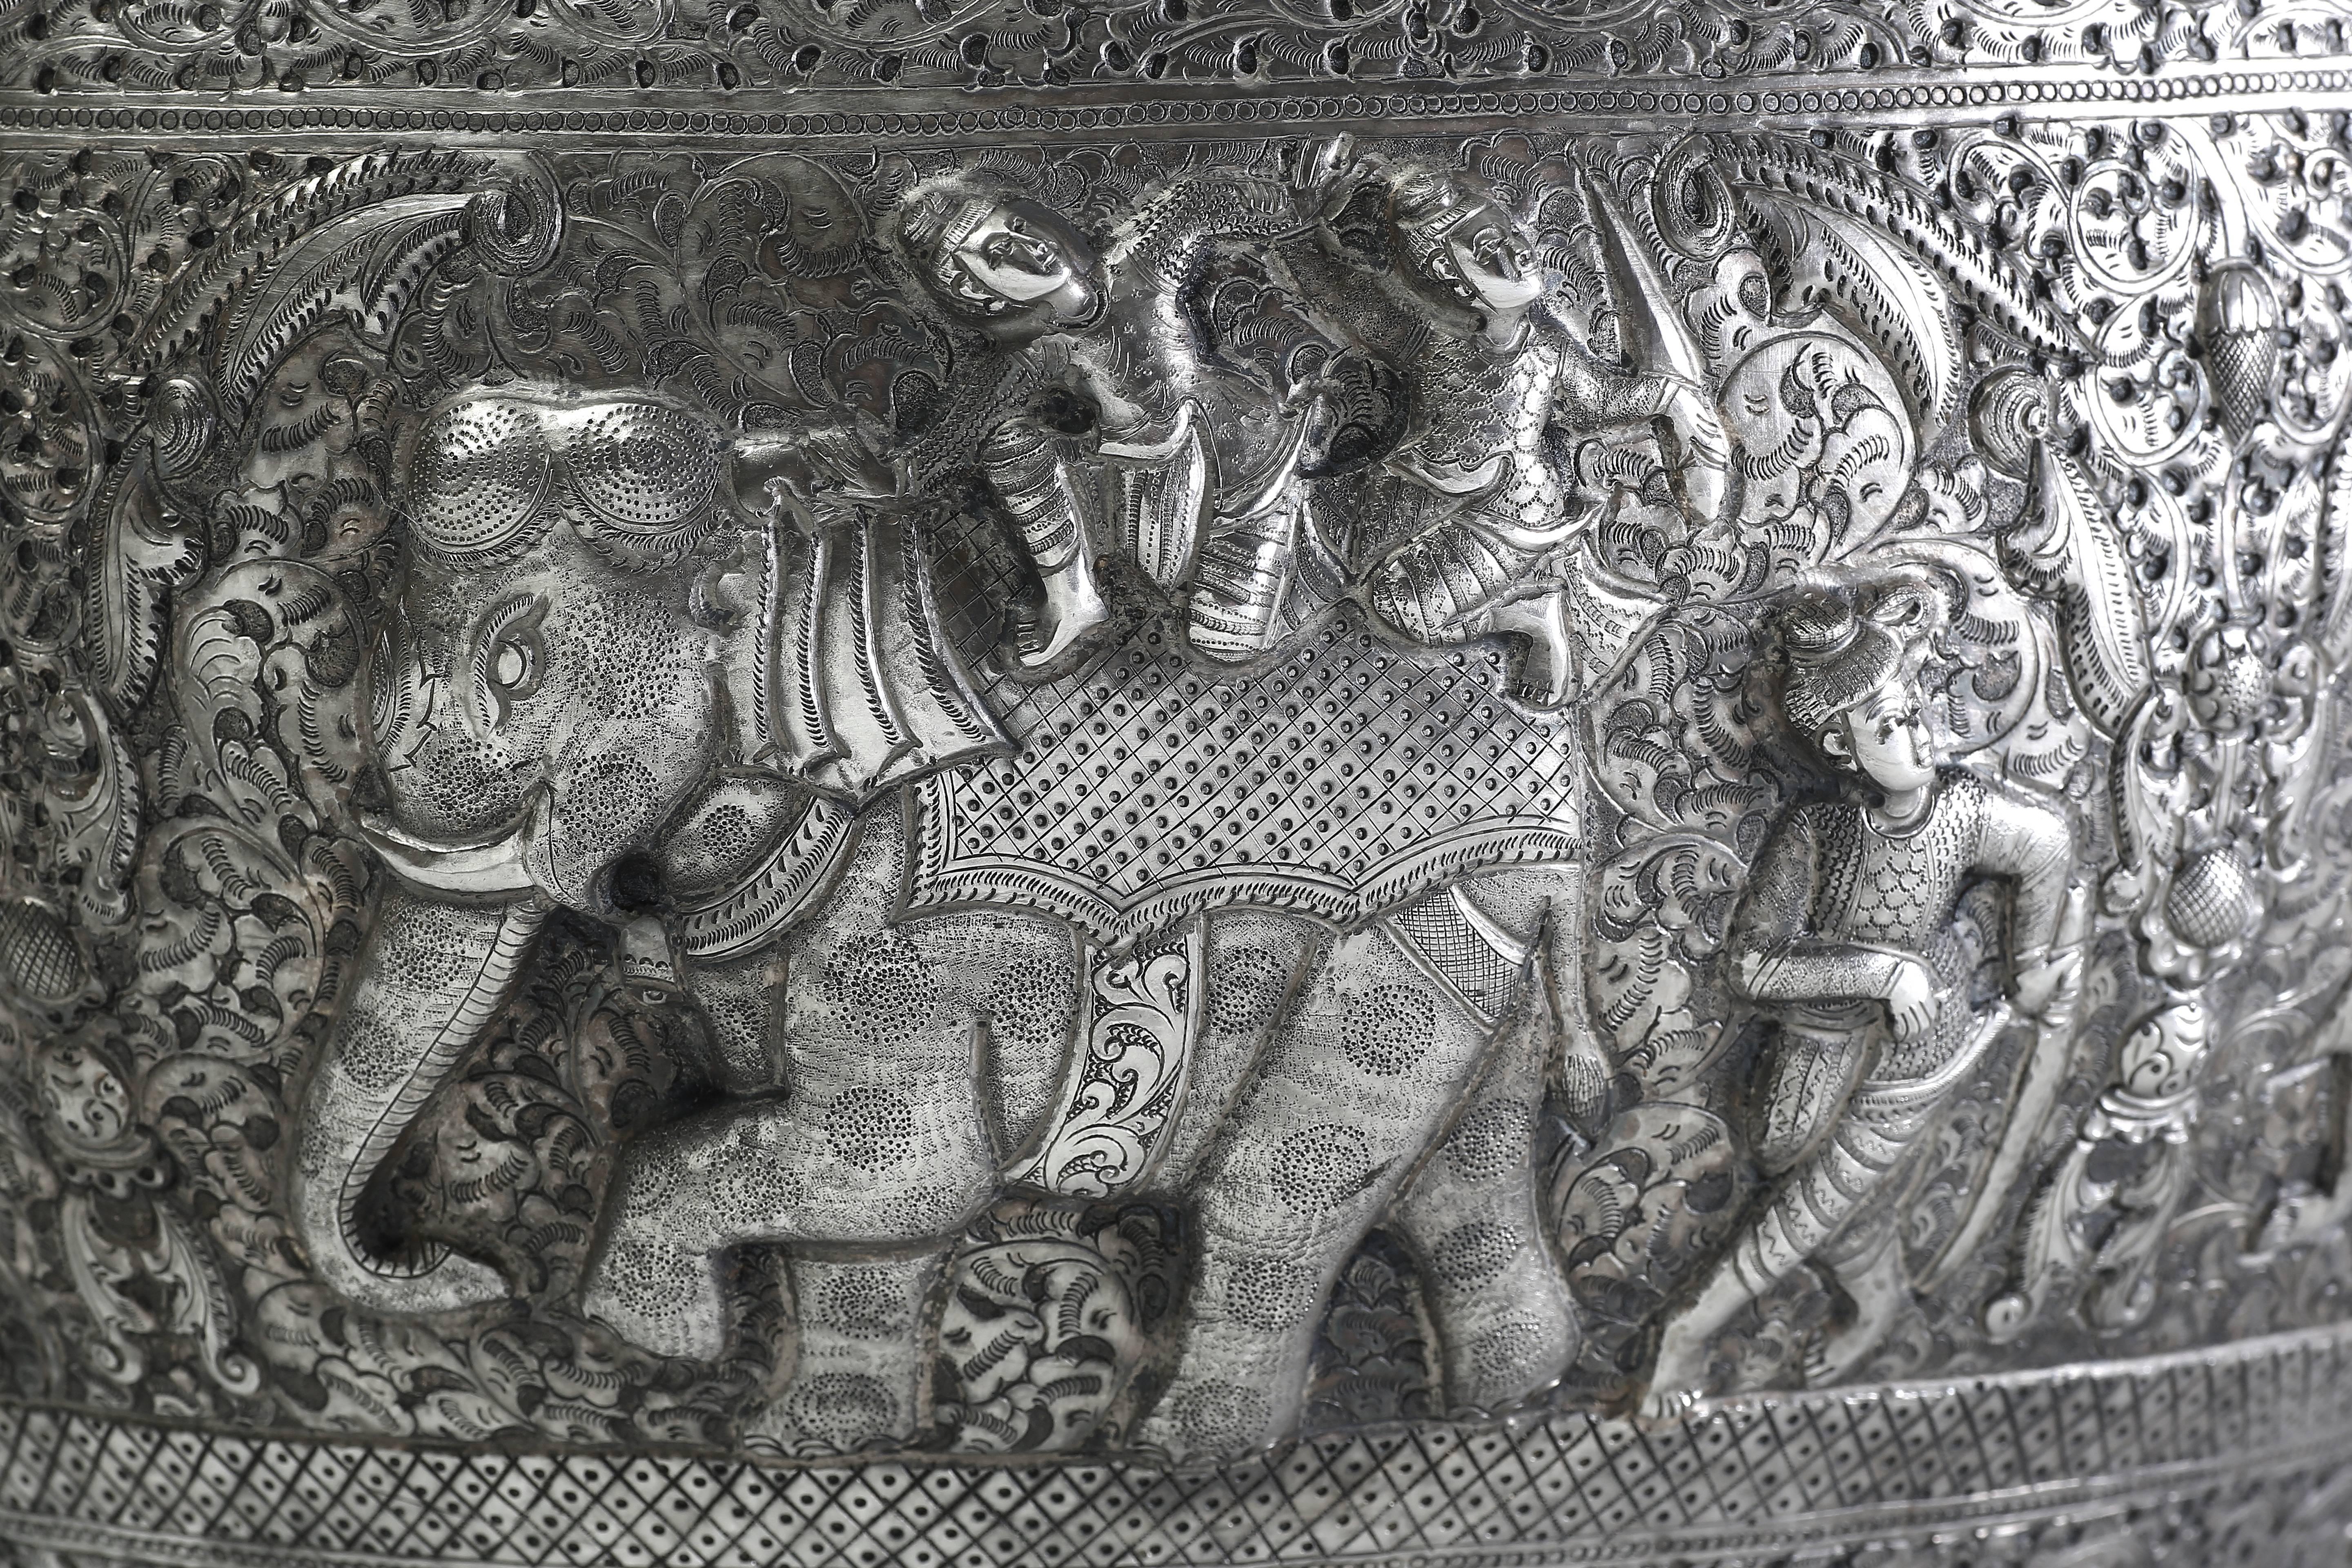 Hand-Crafted Hand-Worked Solid Silver Burmese Ceremonial Bowl, High Relief Jataka Scenes